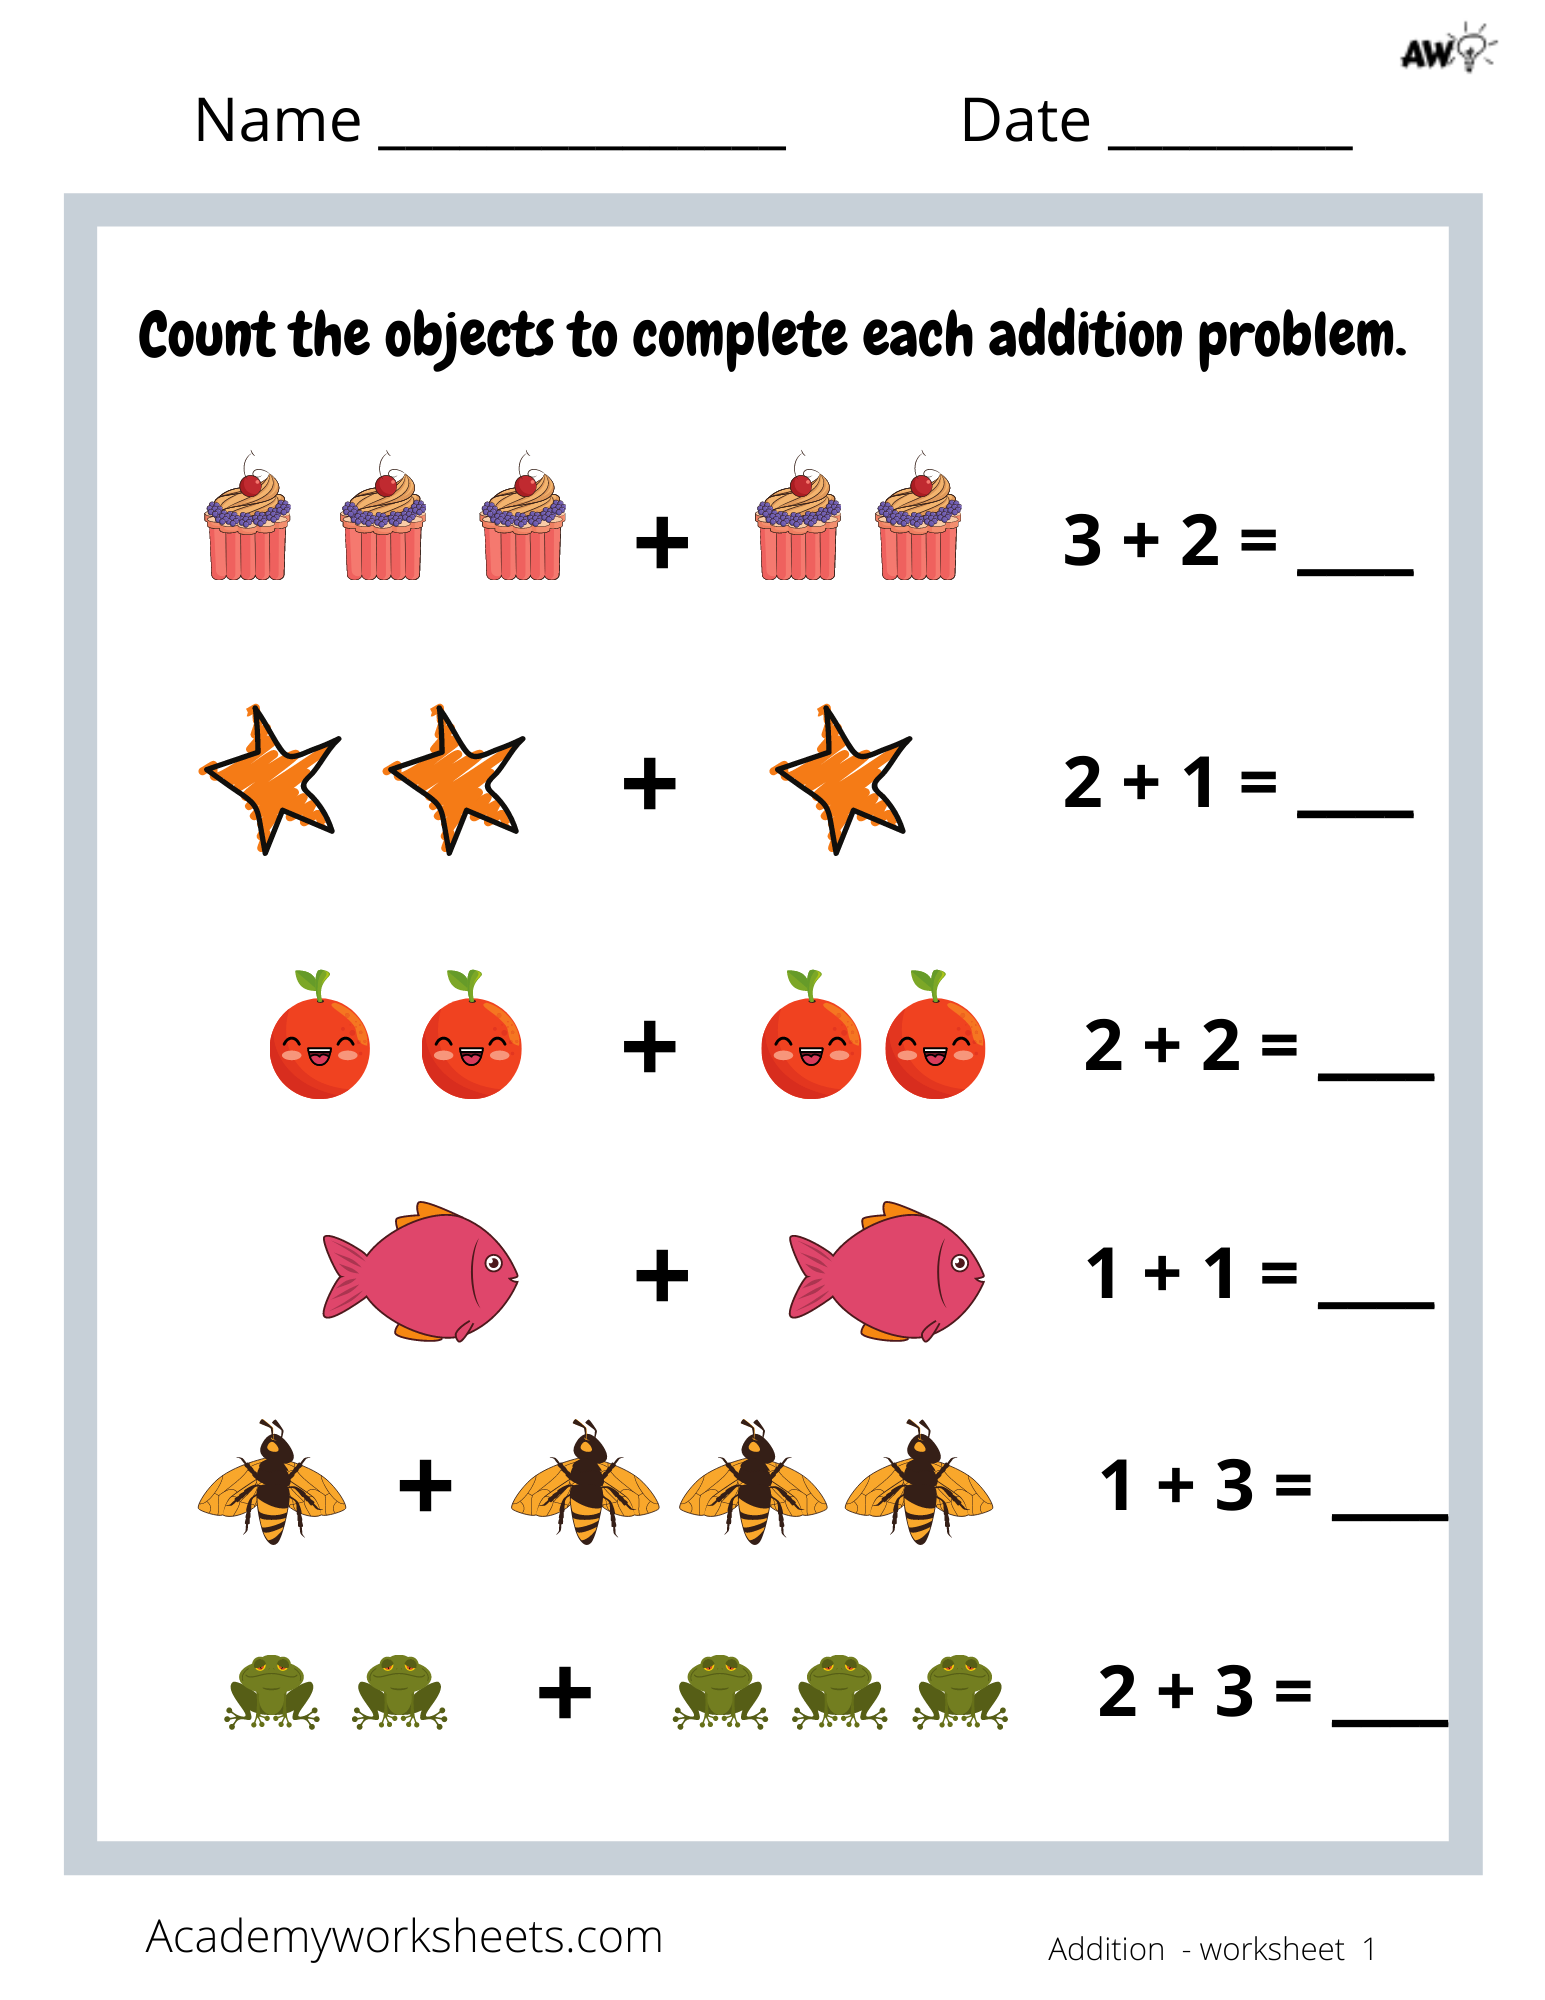 addition-sums-to-5-with-pictures-academy-worksheets